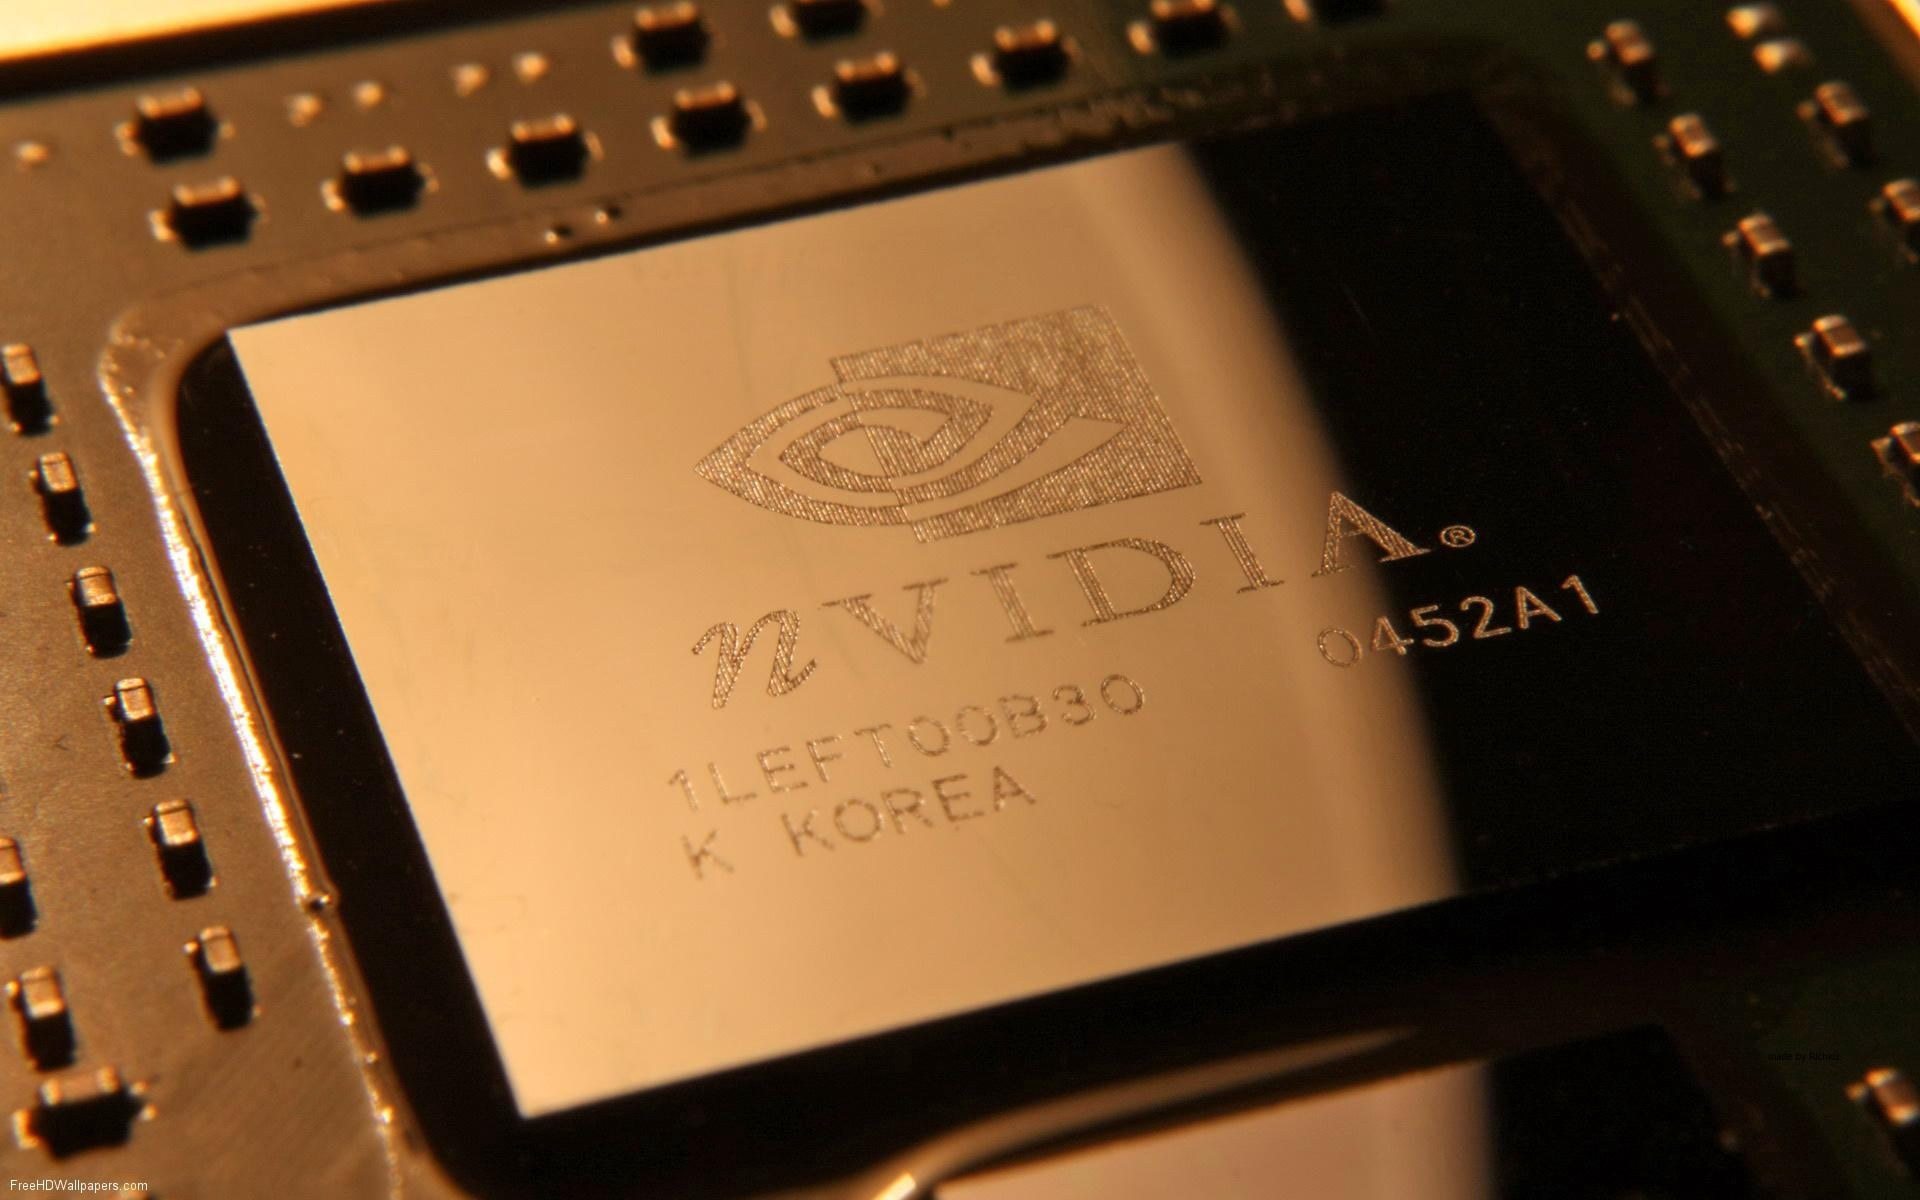 Nvidia internal HDD, corporation, brands, card, boosters, processors